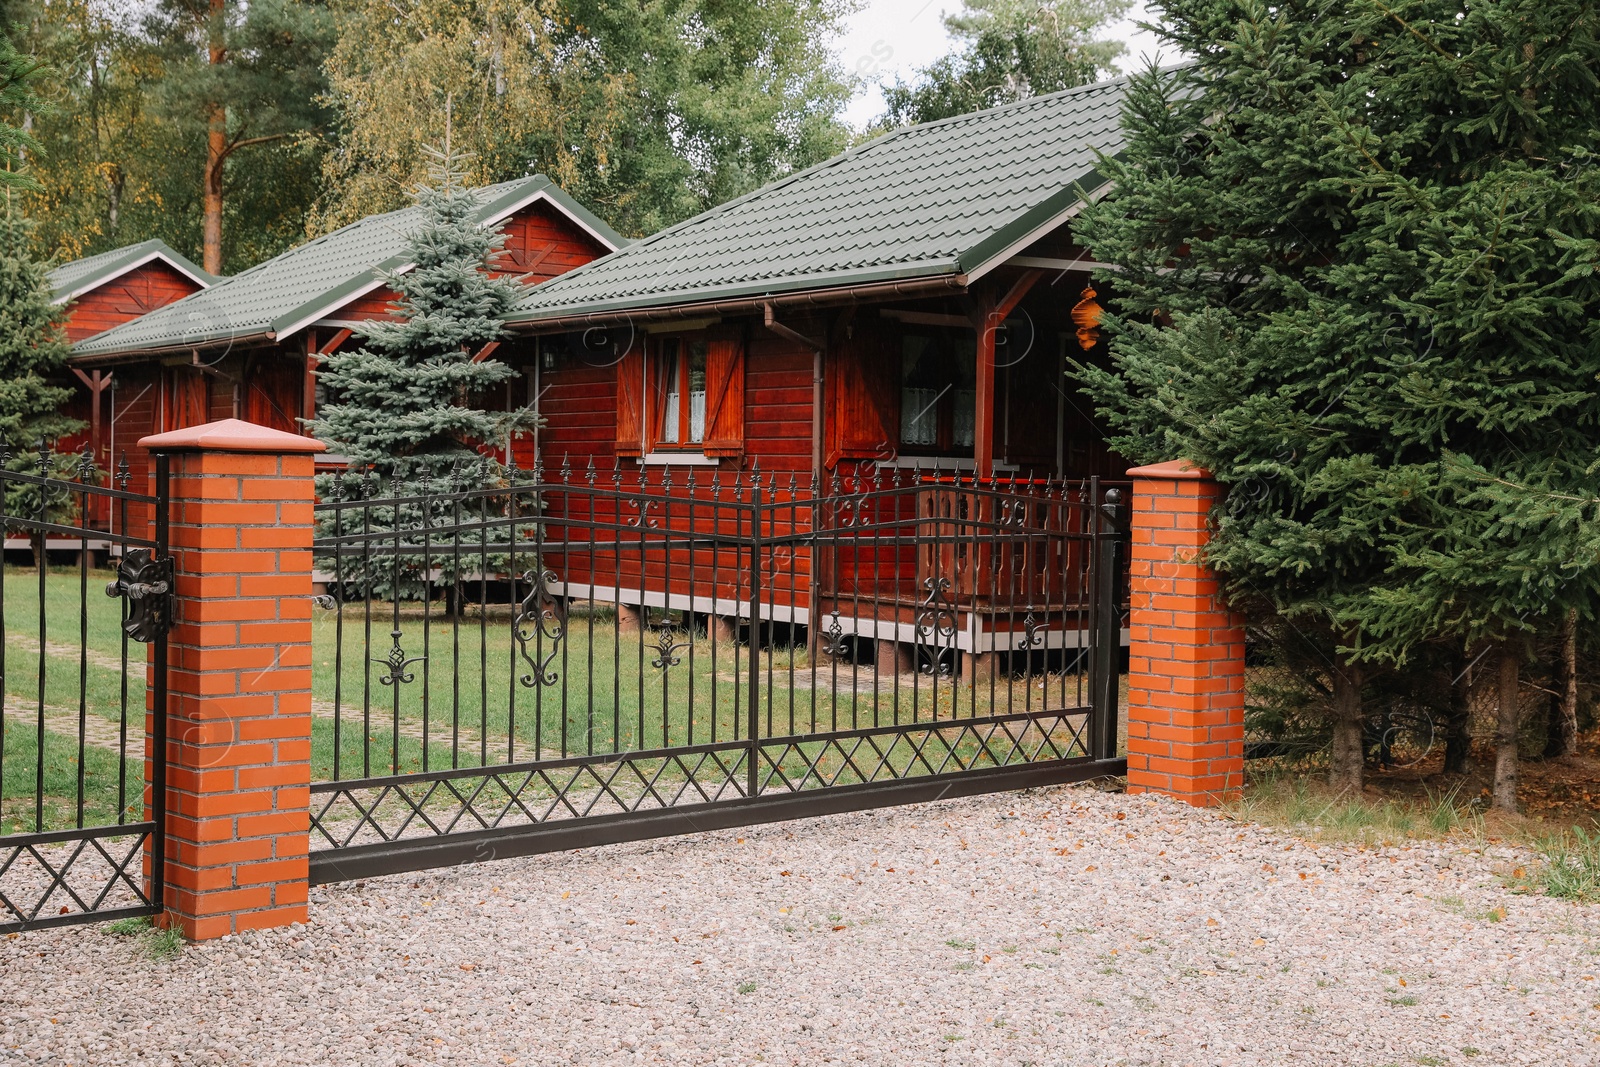 Photo of Closed metal gates near beautiful garden and houses outdoors